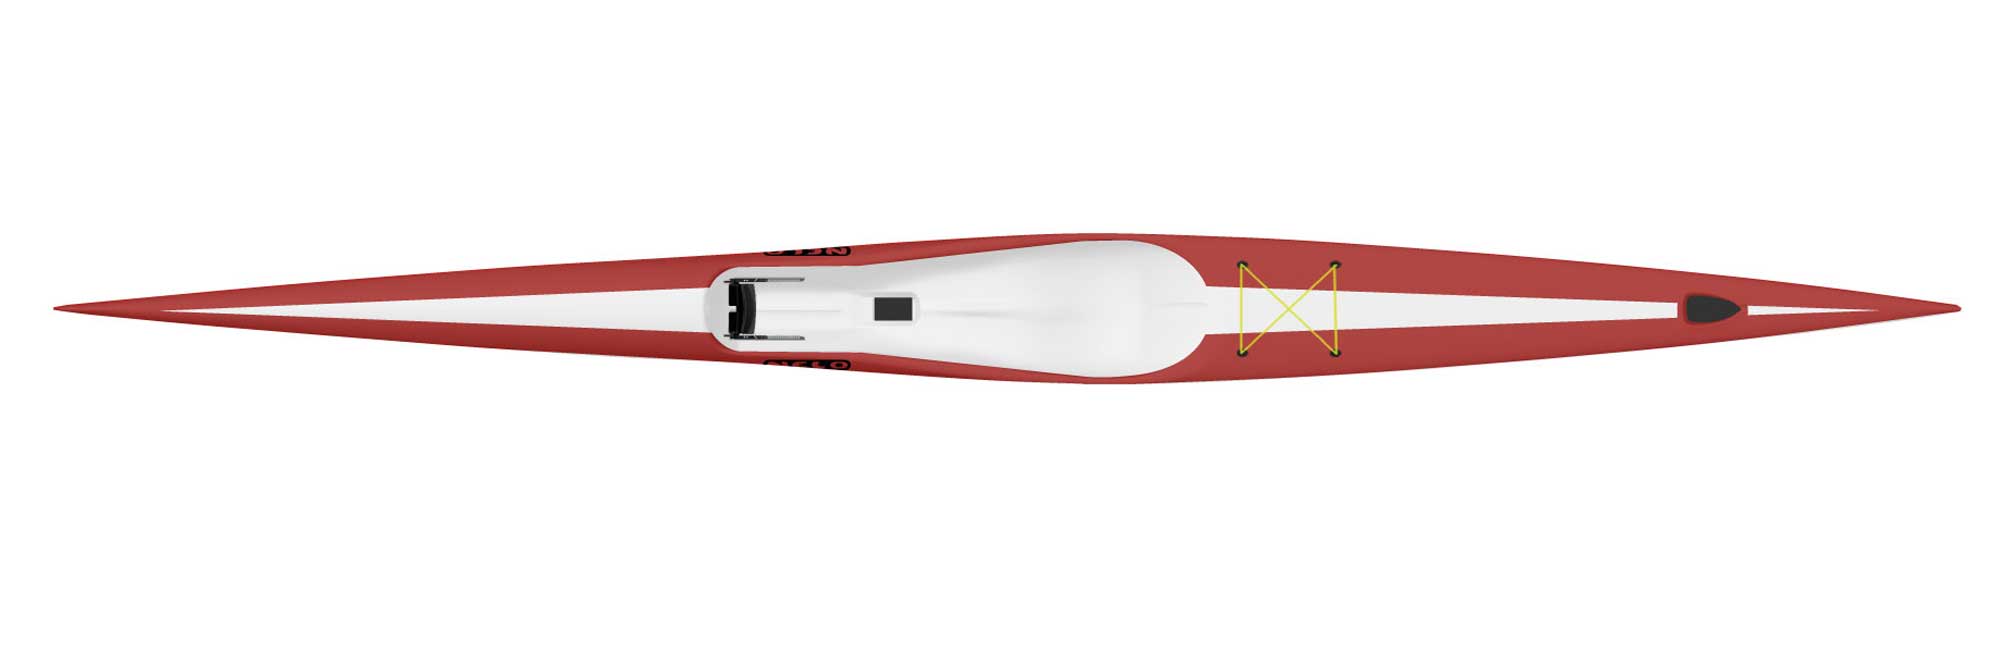 New Nelo Vanquish ski for sale, red with a white stripe on the deck.